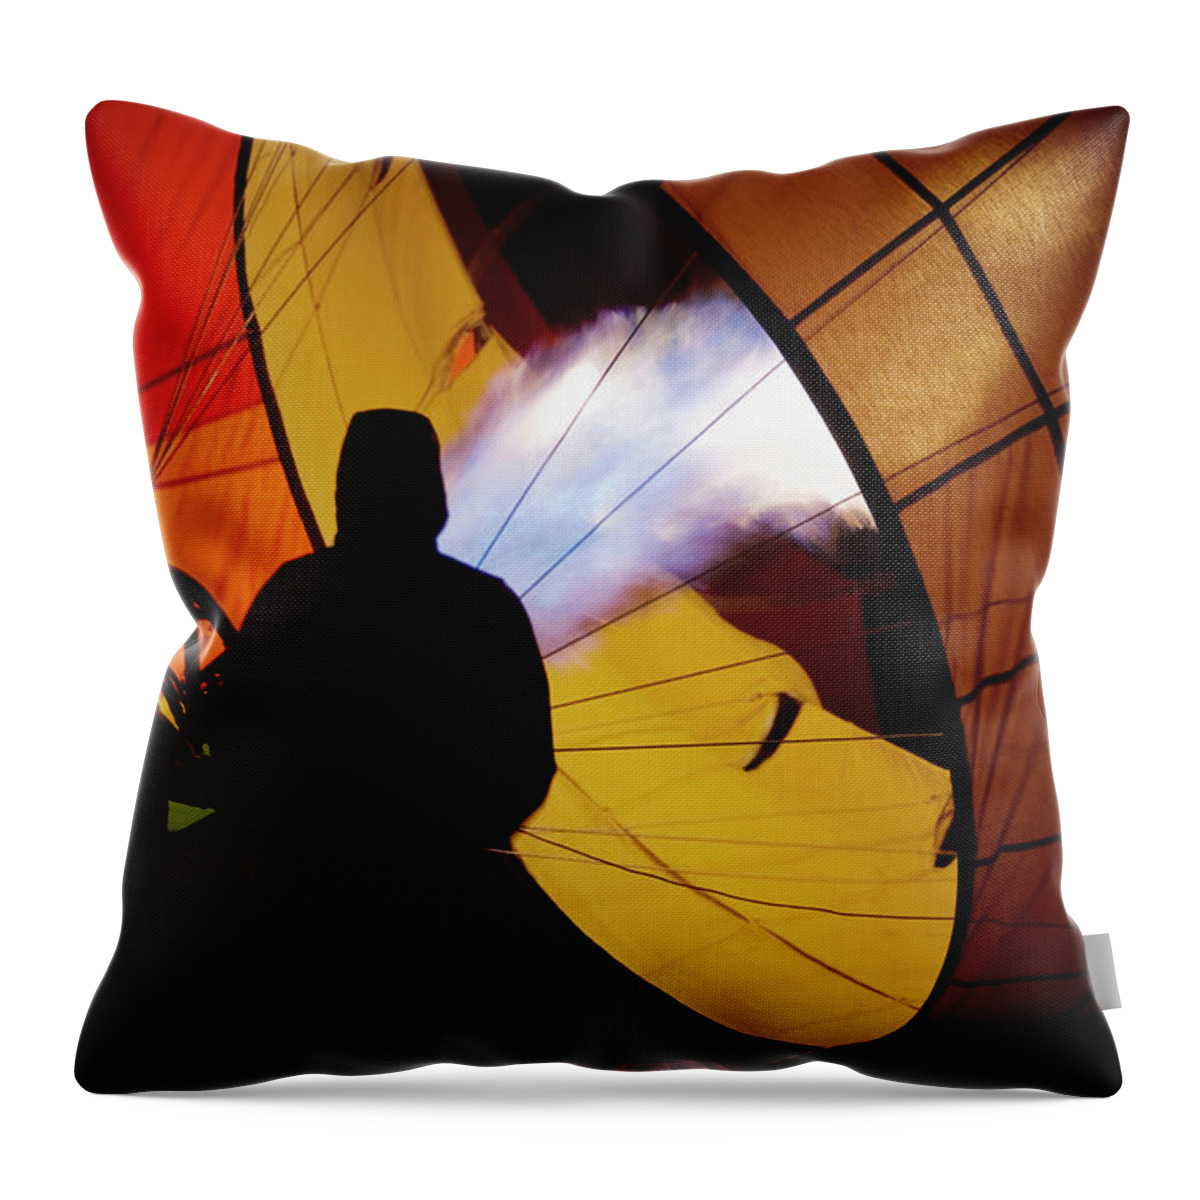 Adventure Throw Pillow featuring the photograph A Man As He Inflates A Hot Air Balloon by Ron Koeberer